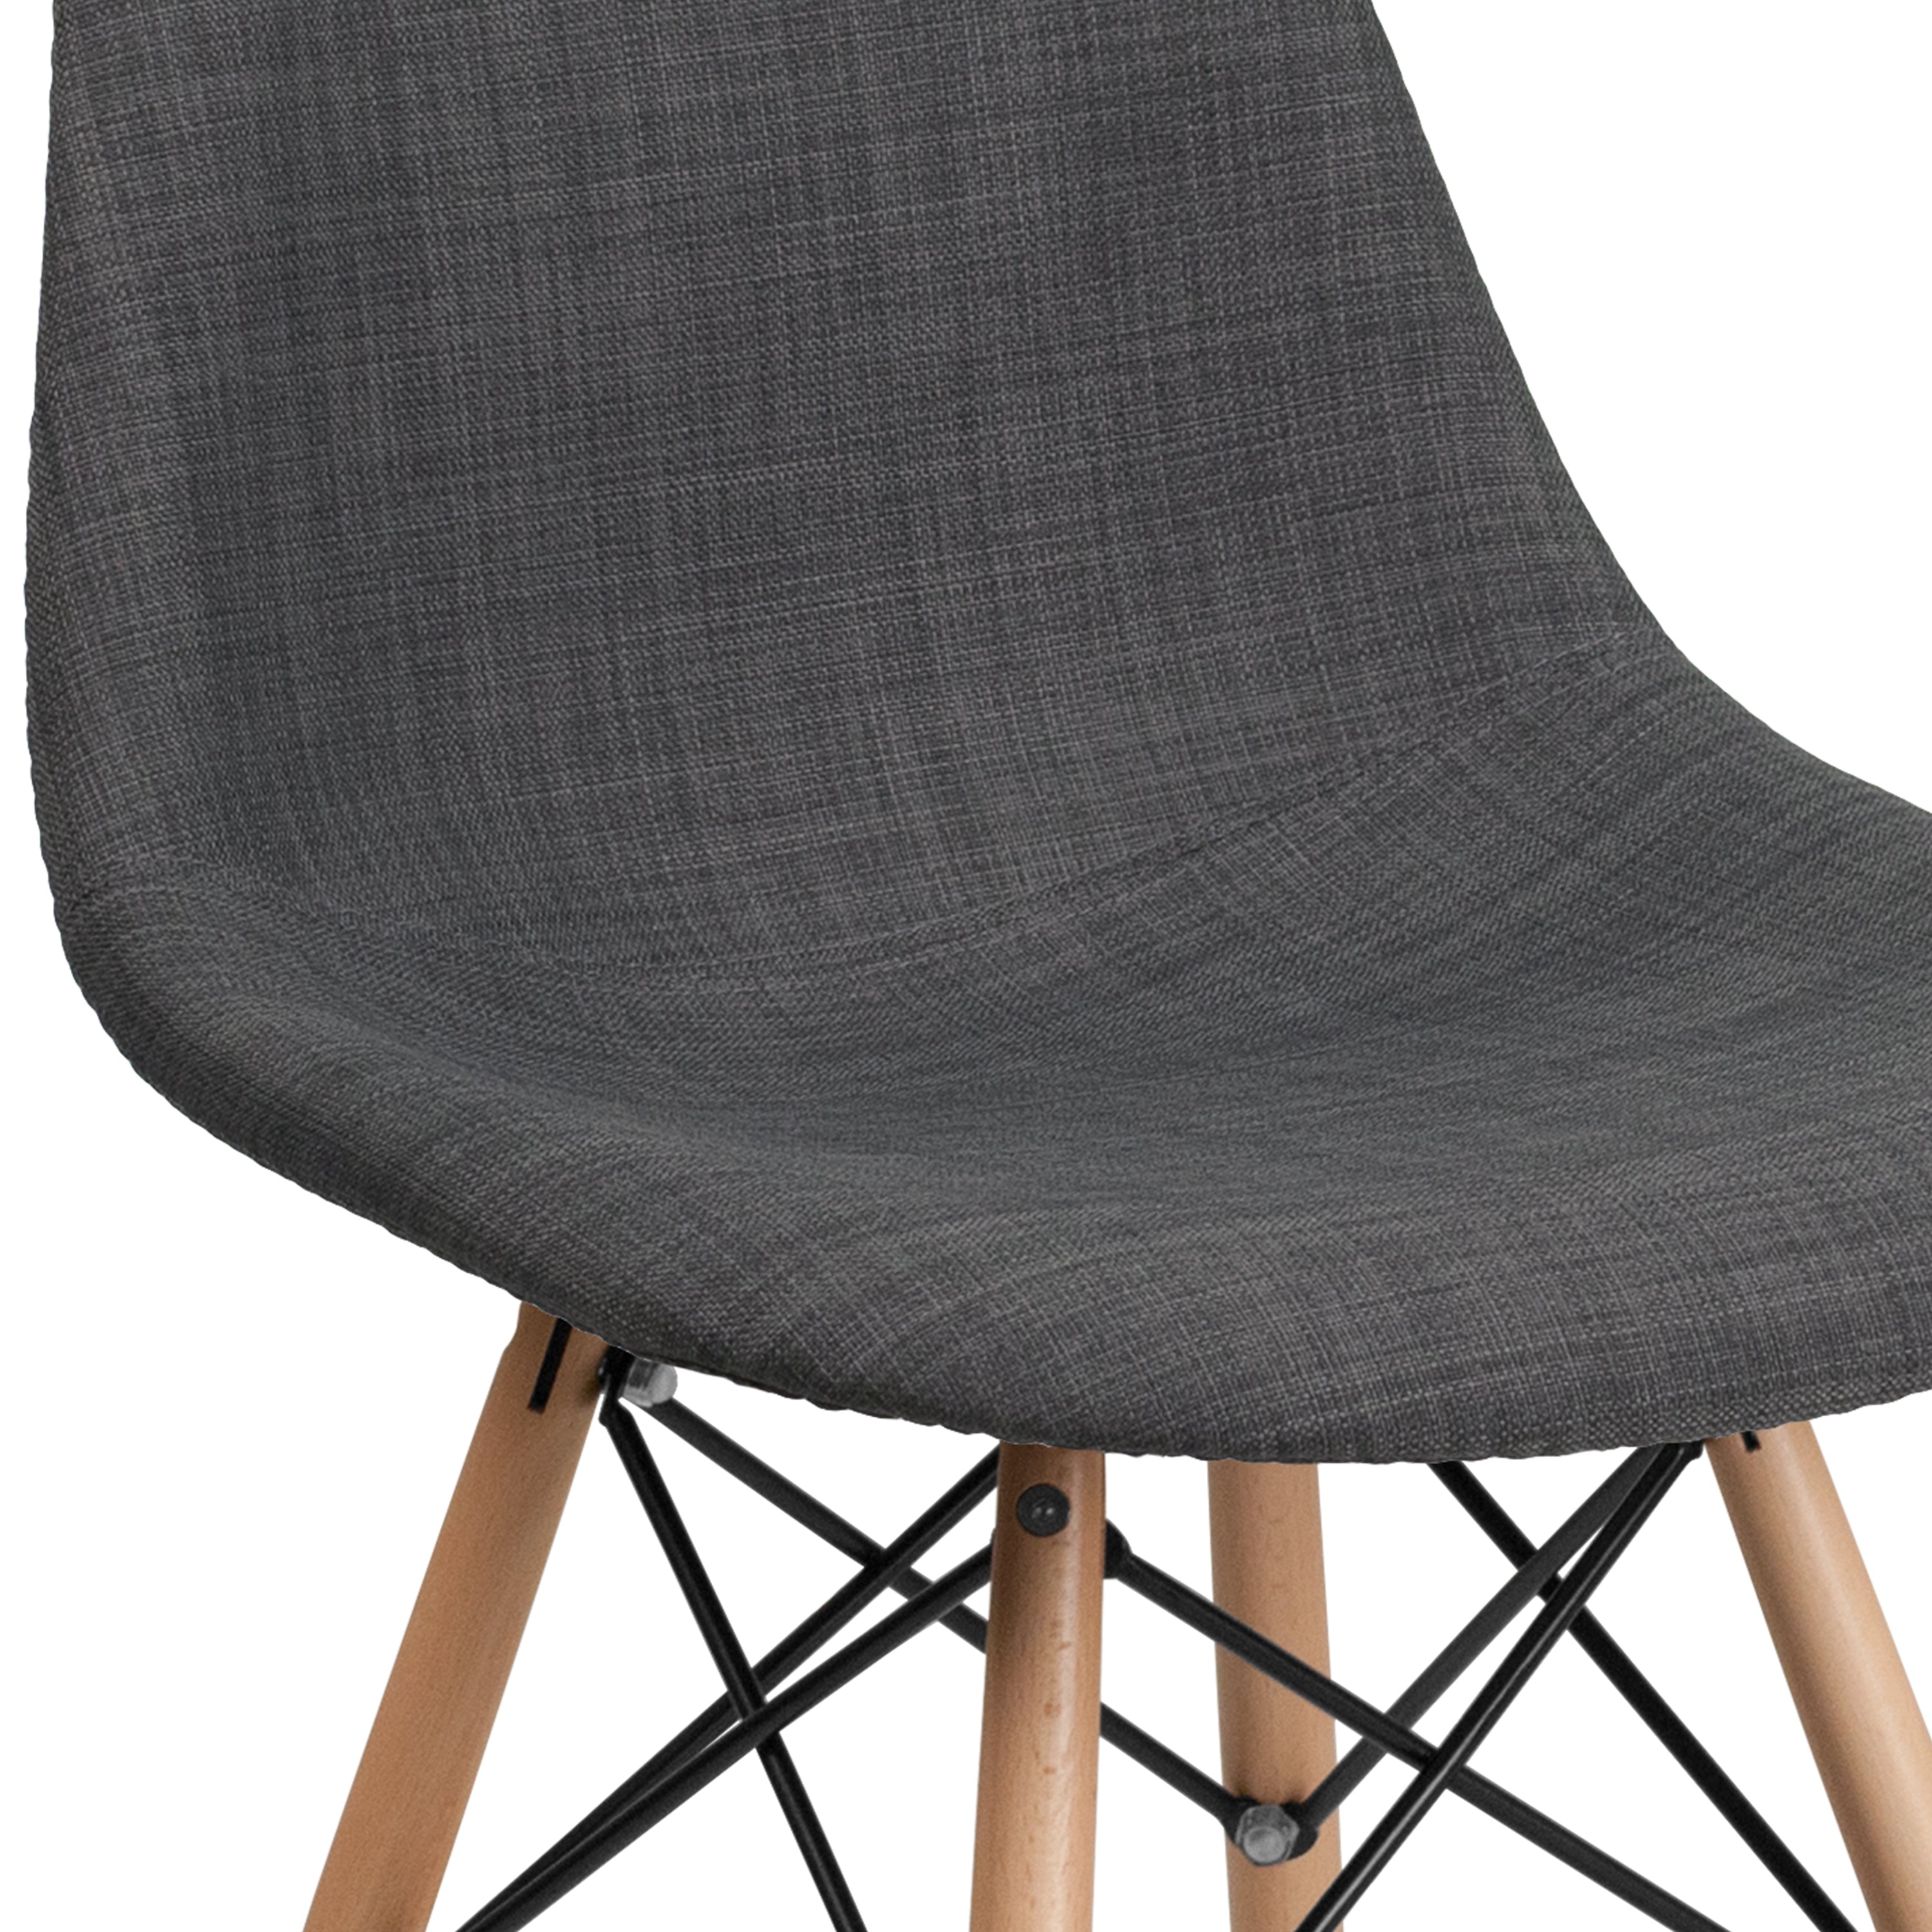 Elon Series Fabric Chair with Wooden Legs-Accent Chair-Flash Furniture-Wall2Wall Furnishings